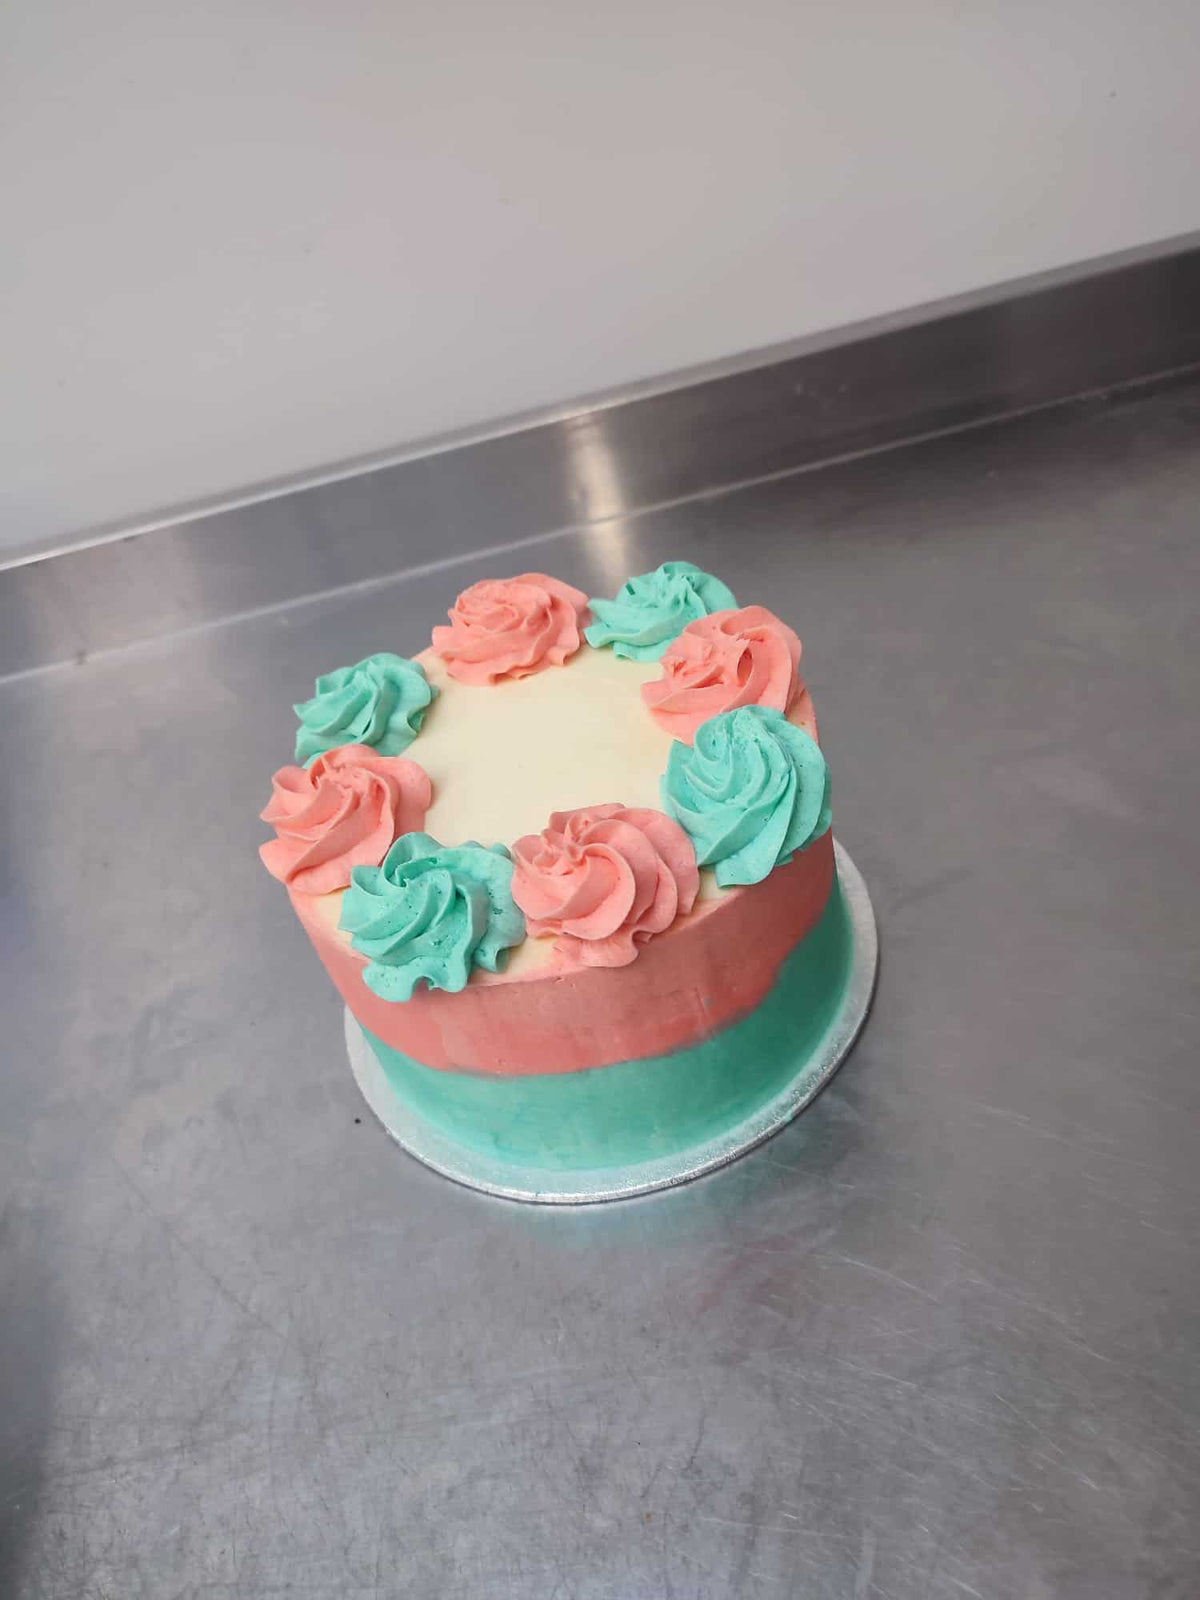 A Custom Made Low Sugar Cake adorned with pink, green, and blue flowers from No Guilt Bakes.